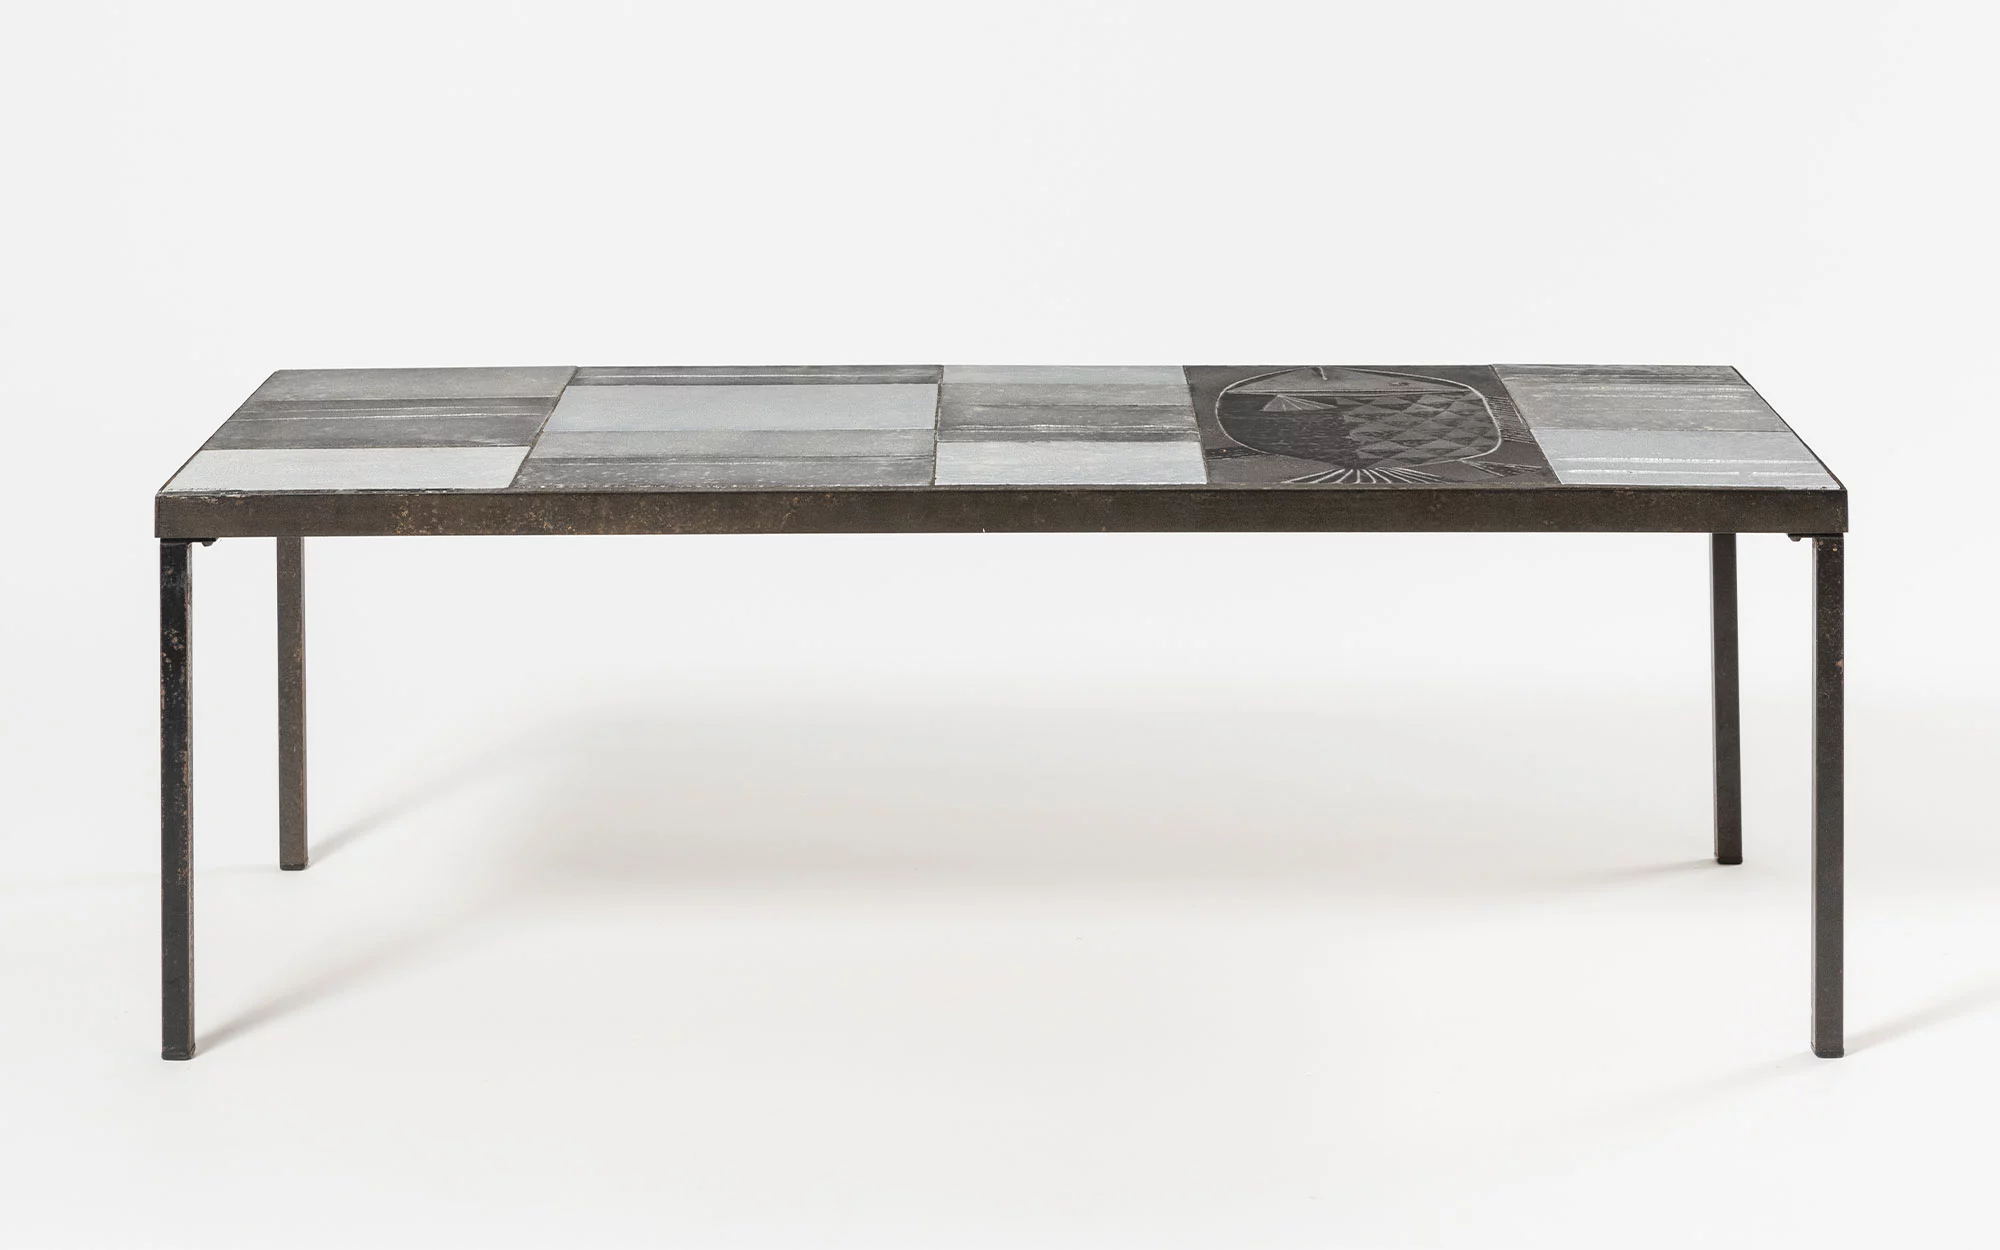 Tabe basse Poisson - Roger Capron - Coffee table - Galerie kreo